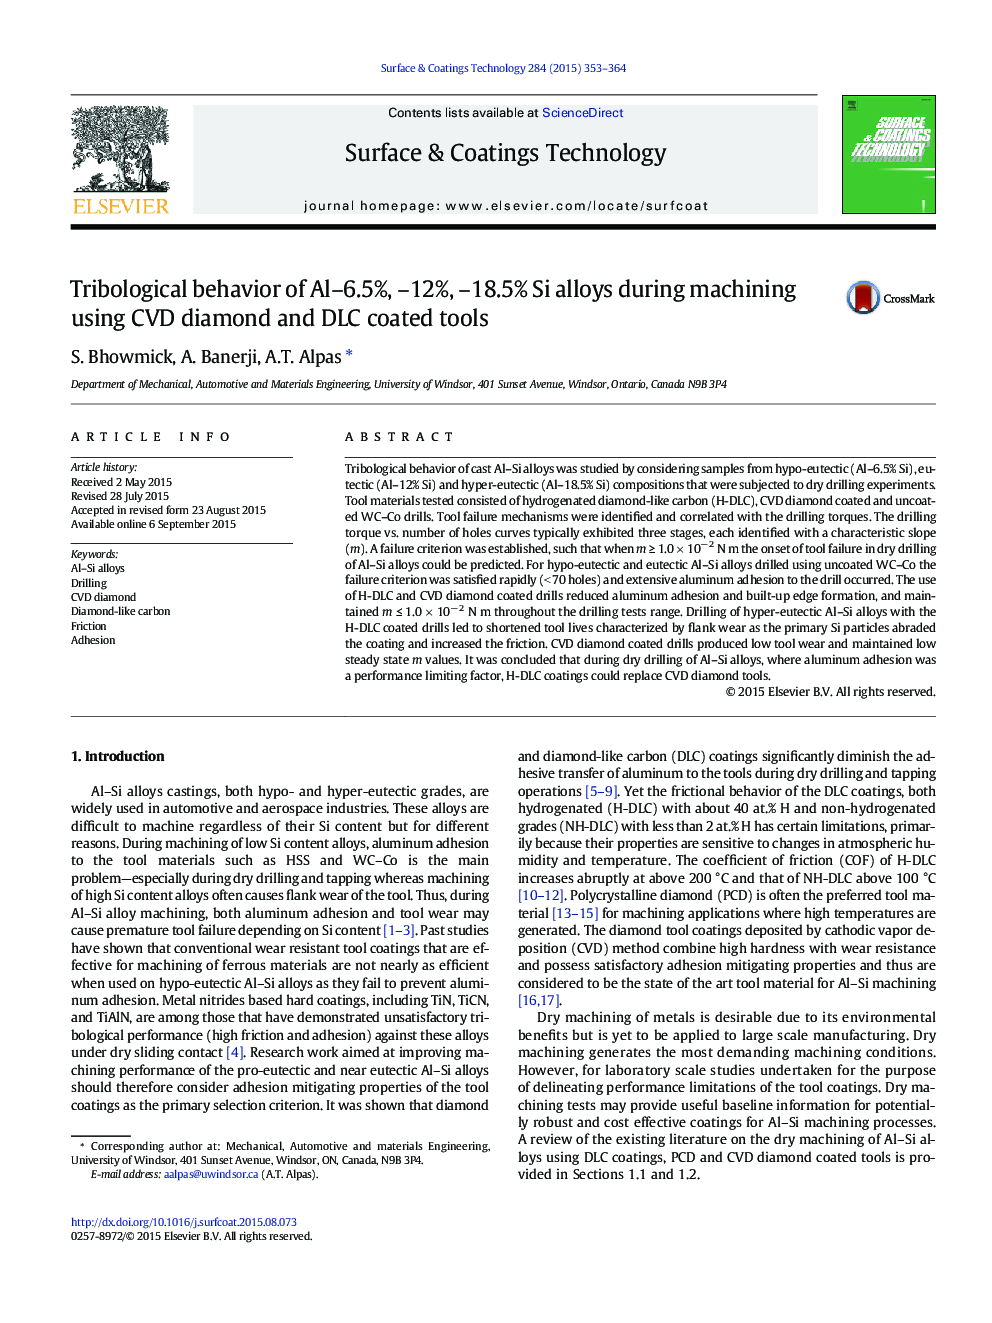 Tribological behavior of Al–6.5%, –12%, –18.5% Si alloys during machining using CVD diamond and DLC coated tools